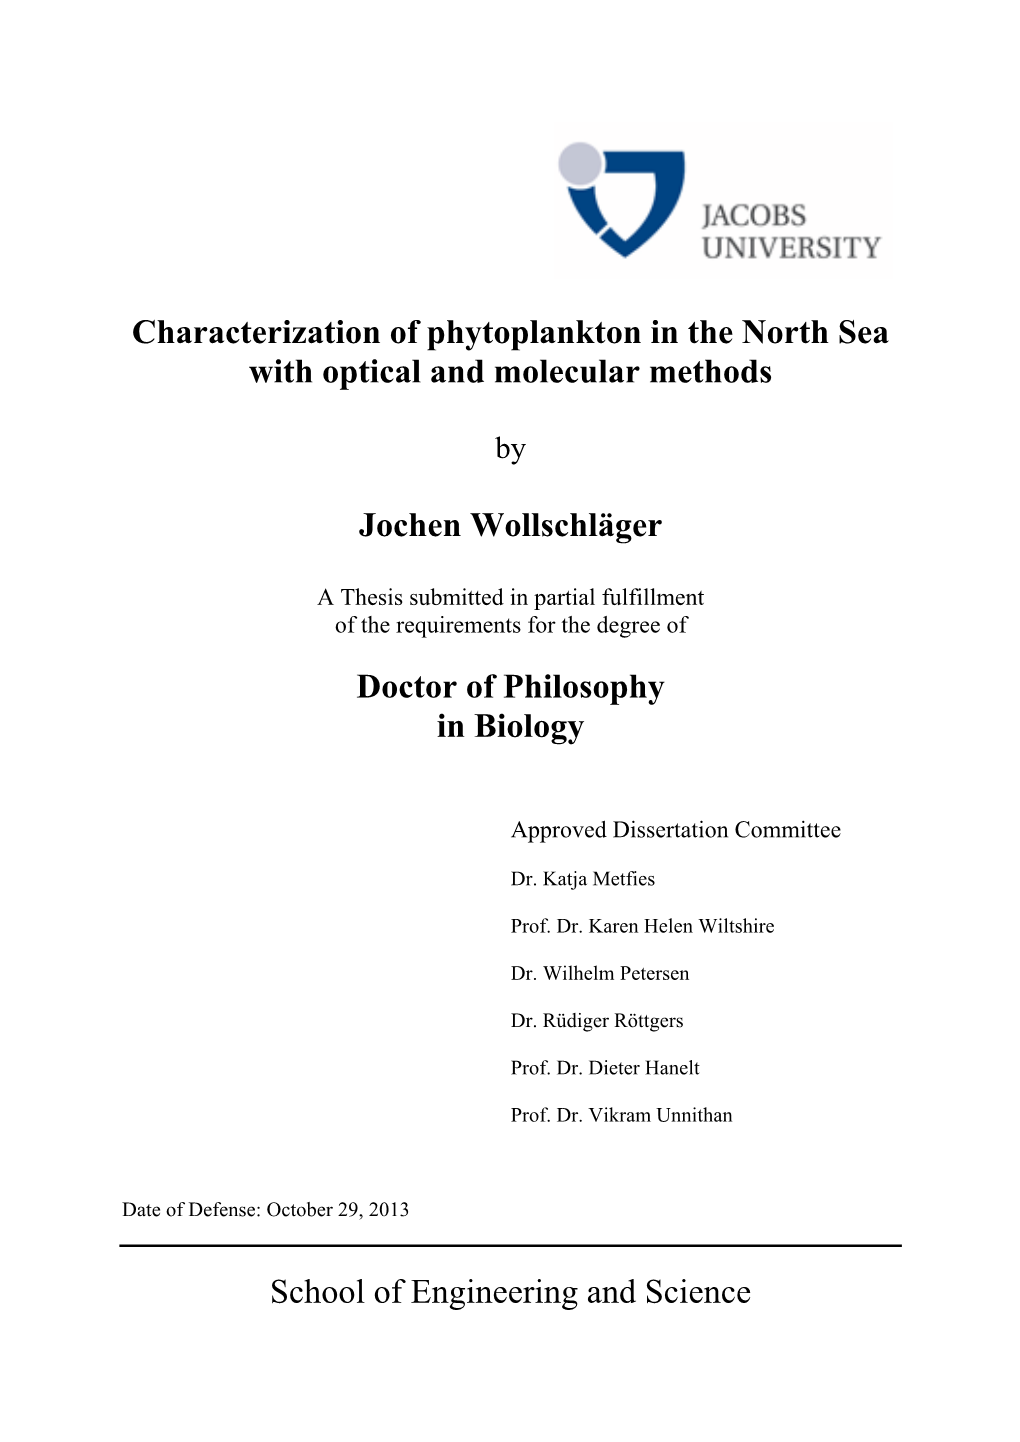 Characterization of Phytoplankton in the North Sea with Optical and Molecular Methods